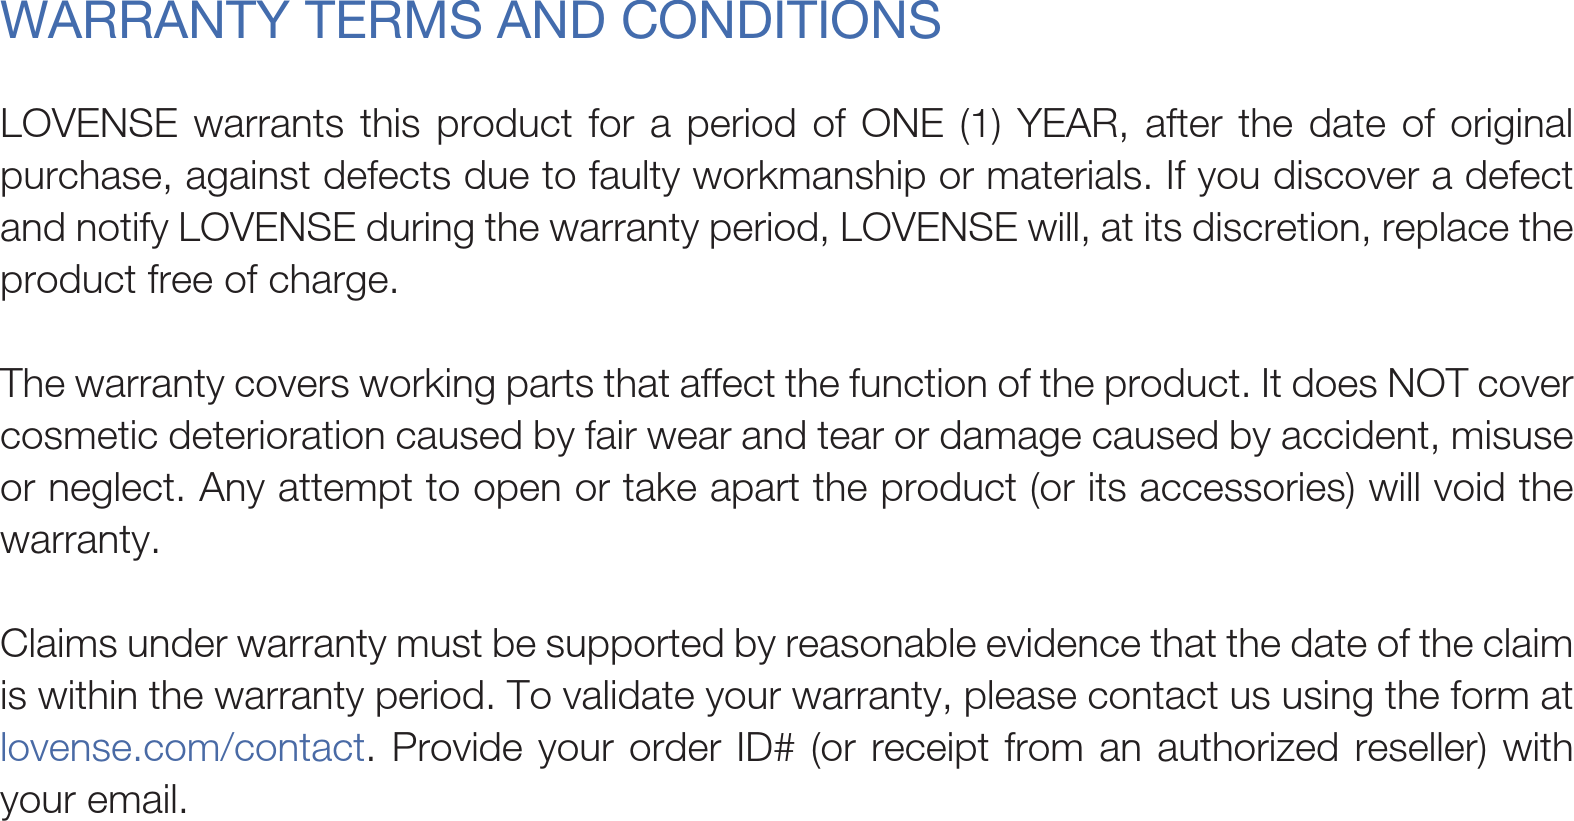 LOVENSE warrants this product for a period of ONE (1) YEAR, after the date of original purchase, against defects due to faulty workmanship or materials. If you discover a defect and notify LOVENSE during the warranty period, LOVENSE will, at its discretion, replace the product free of charge. The warranty covers working parts that affect the function of the product. It does NOT cover cosmetic deterioration caused by fair wear and tear or damage caused by accident, misuse or neglect. Any attempt to open or take apart the product (or its accessories) will void the warranty.Claims under warranty must be supported by reasonable evidence that the date of the claim is within the warranty period. To validate your warranty, please contact us using the form at lovense.com/contact. Provide your order ID# (or receipt from an authorized reseller) with your email.WARRANTY TERMS AND CONDITIONS